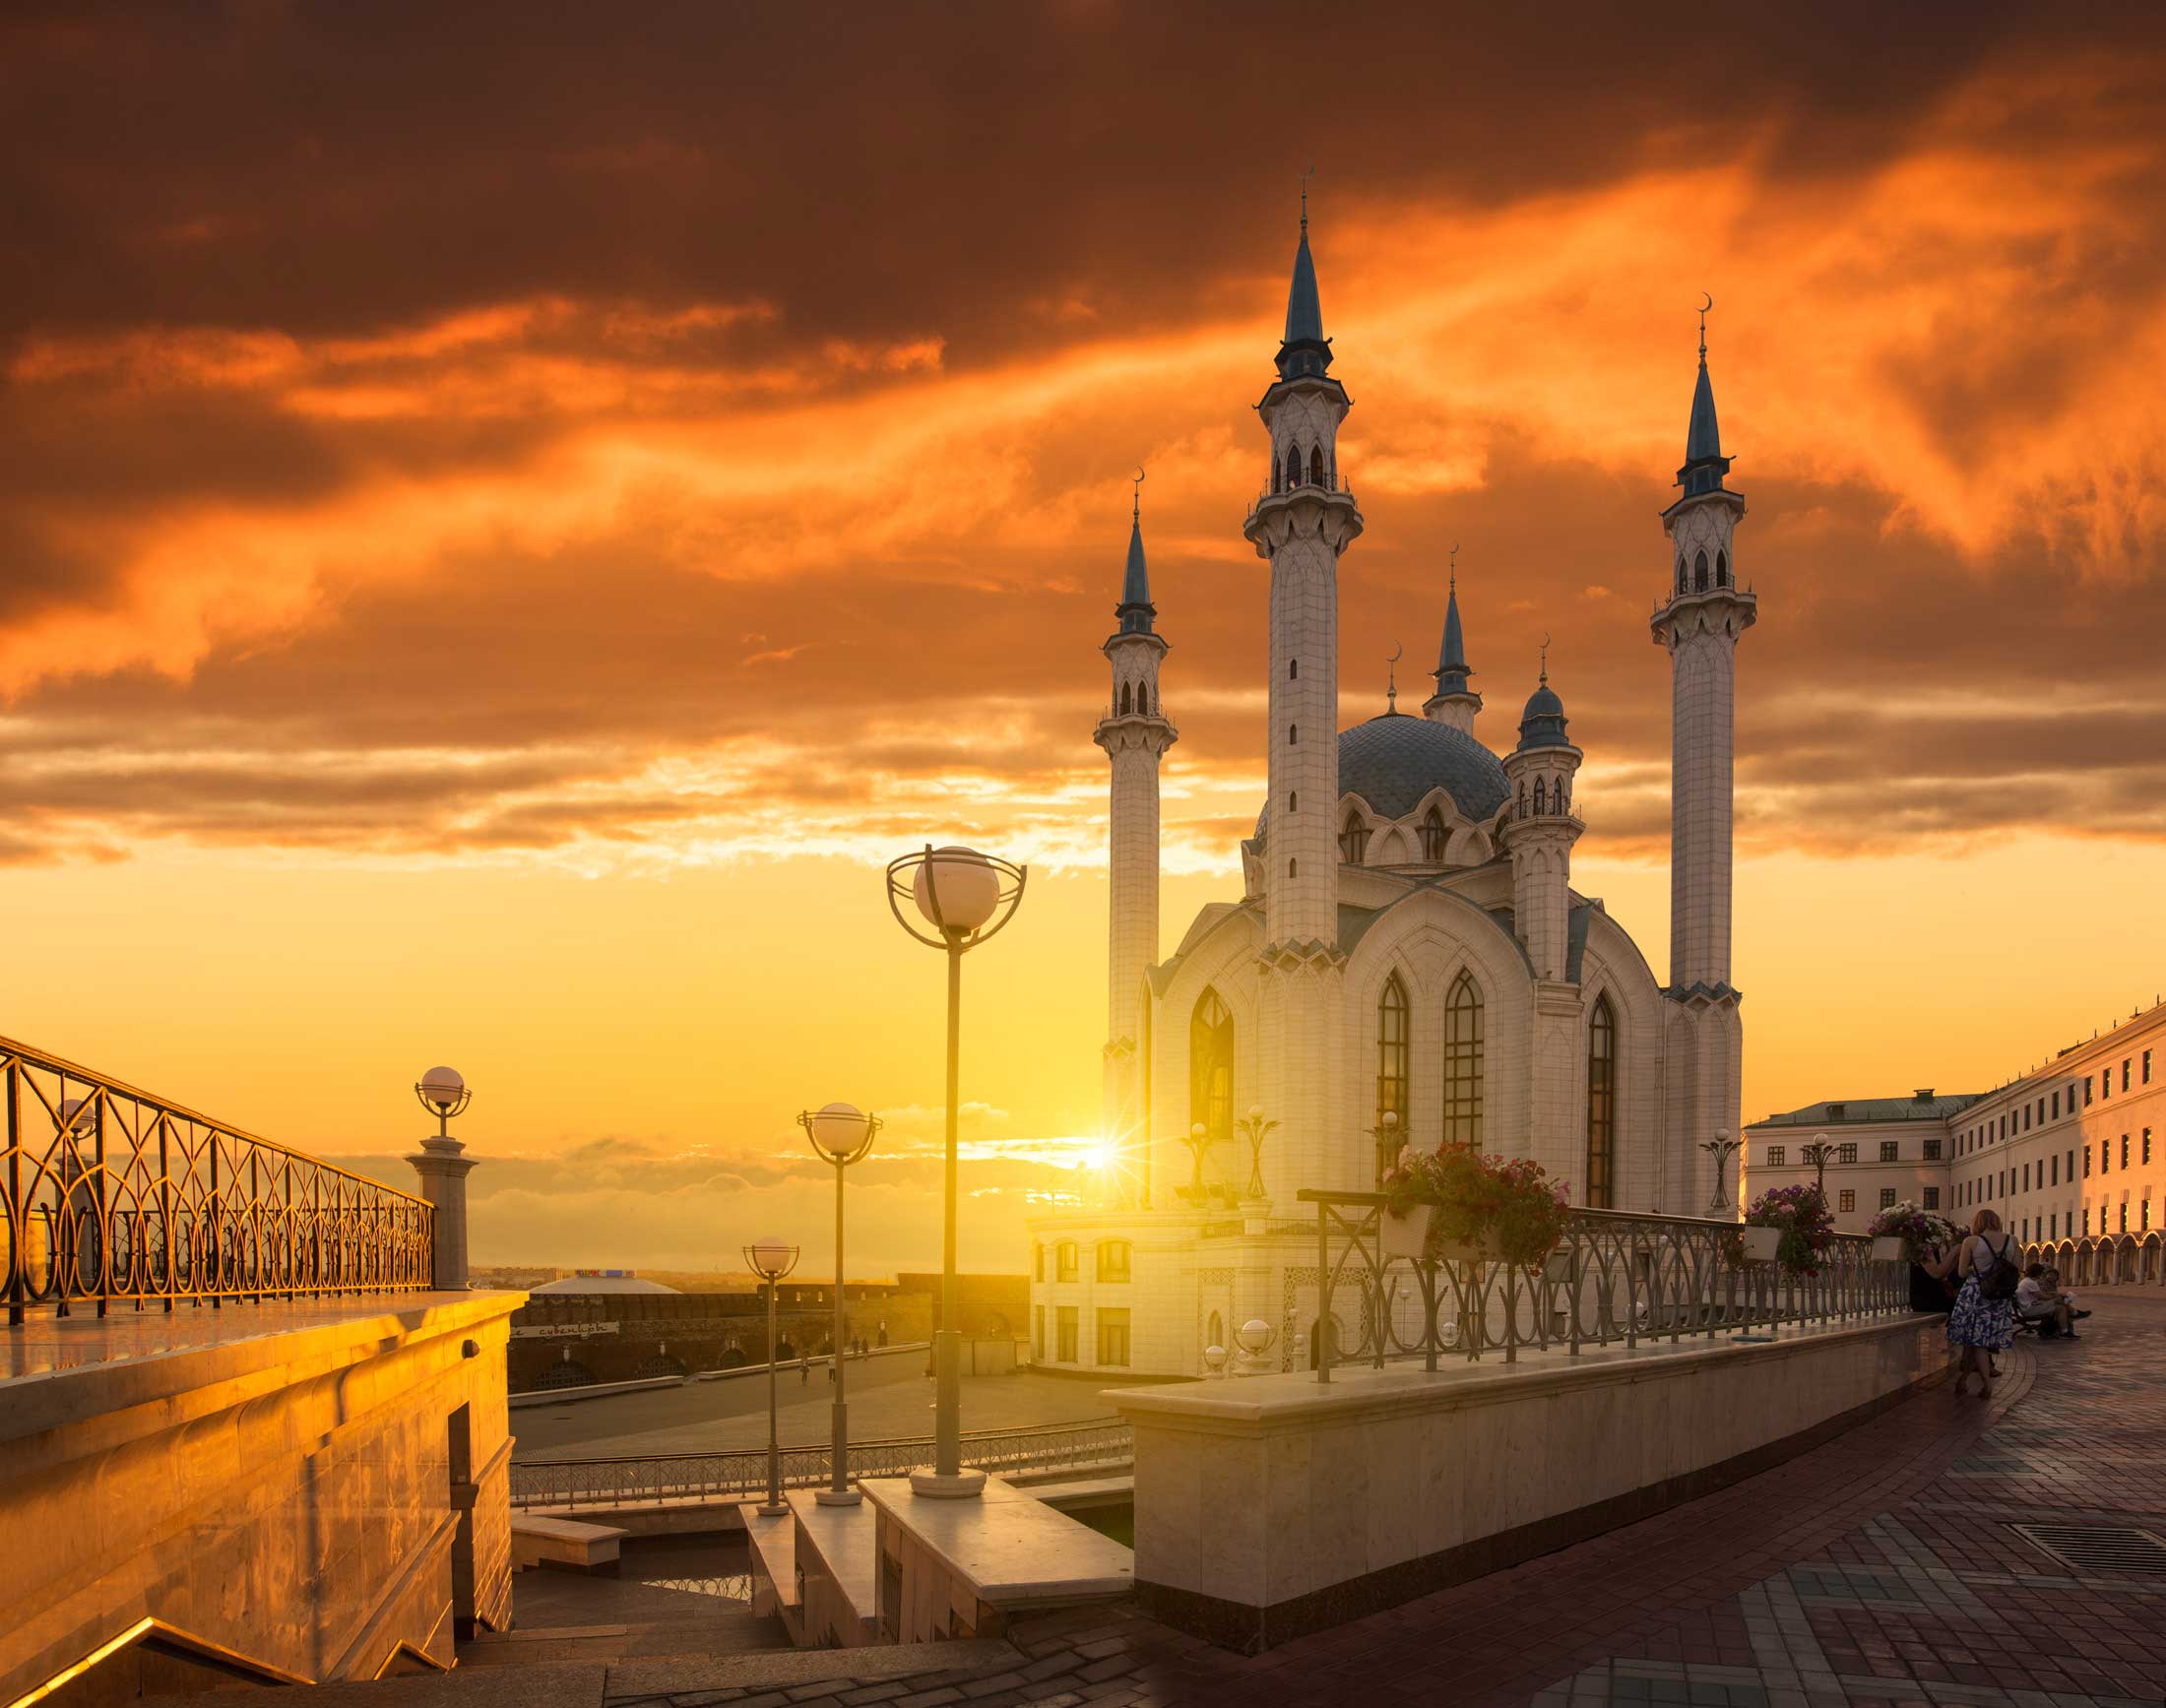 Ancient mosque with the setting sun behind it, Kazan